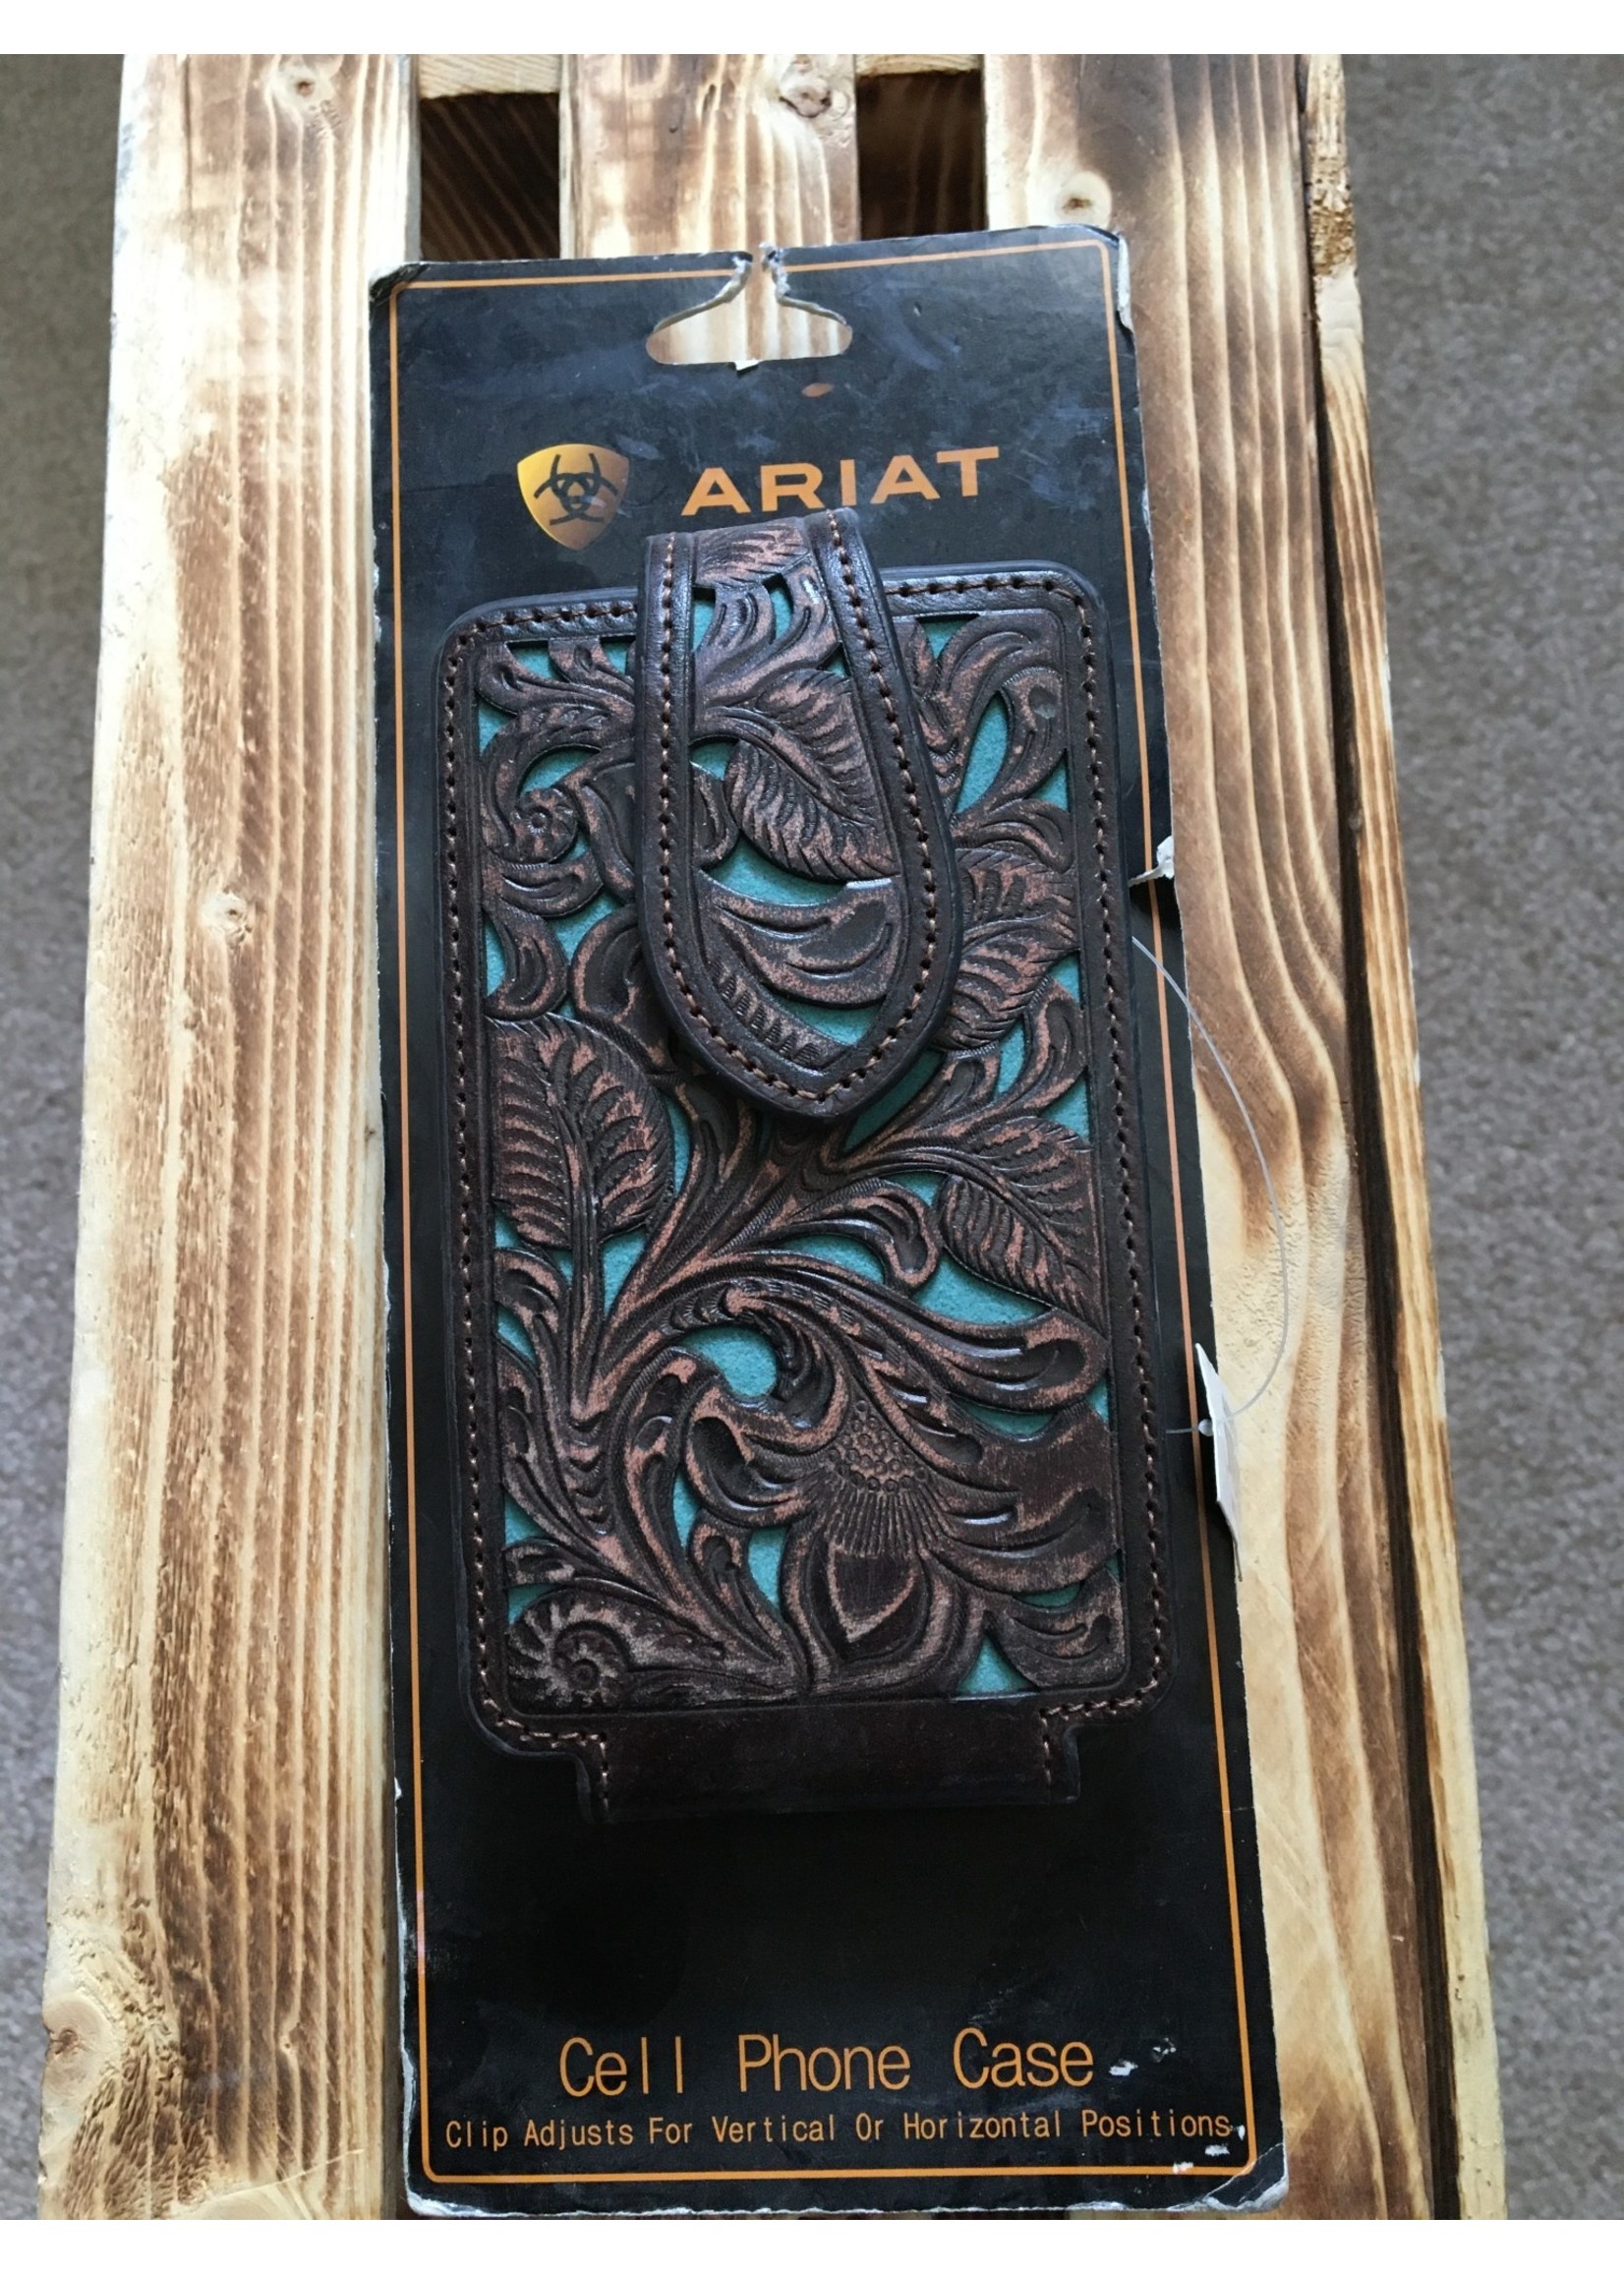 ARIAT TURQUOISE UNDERLAY CELL PHONE CASE